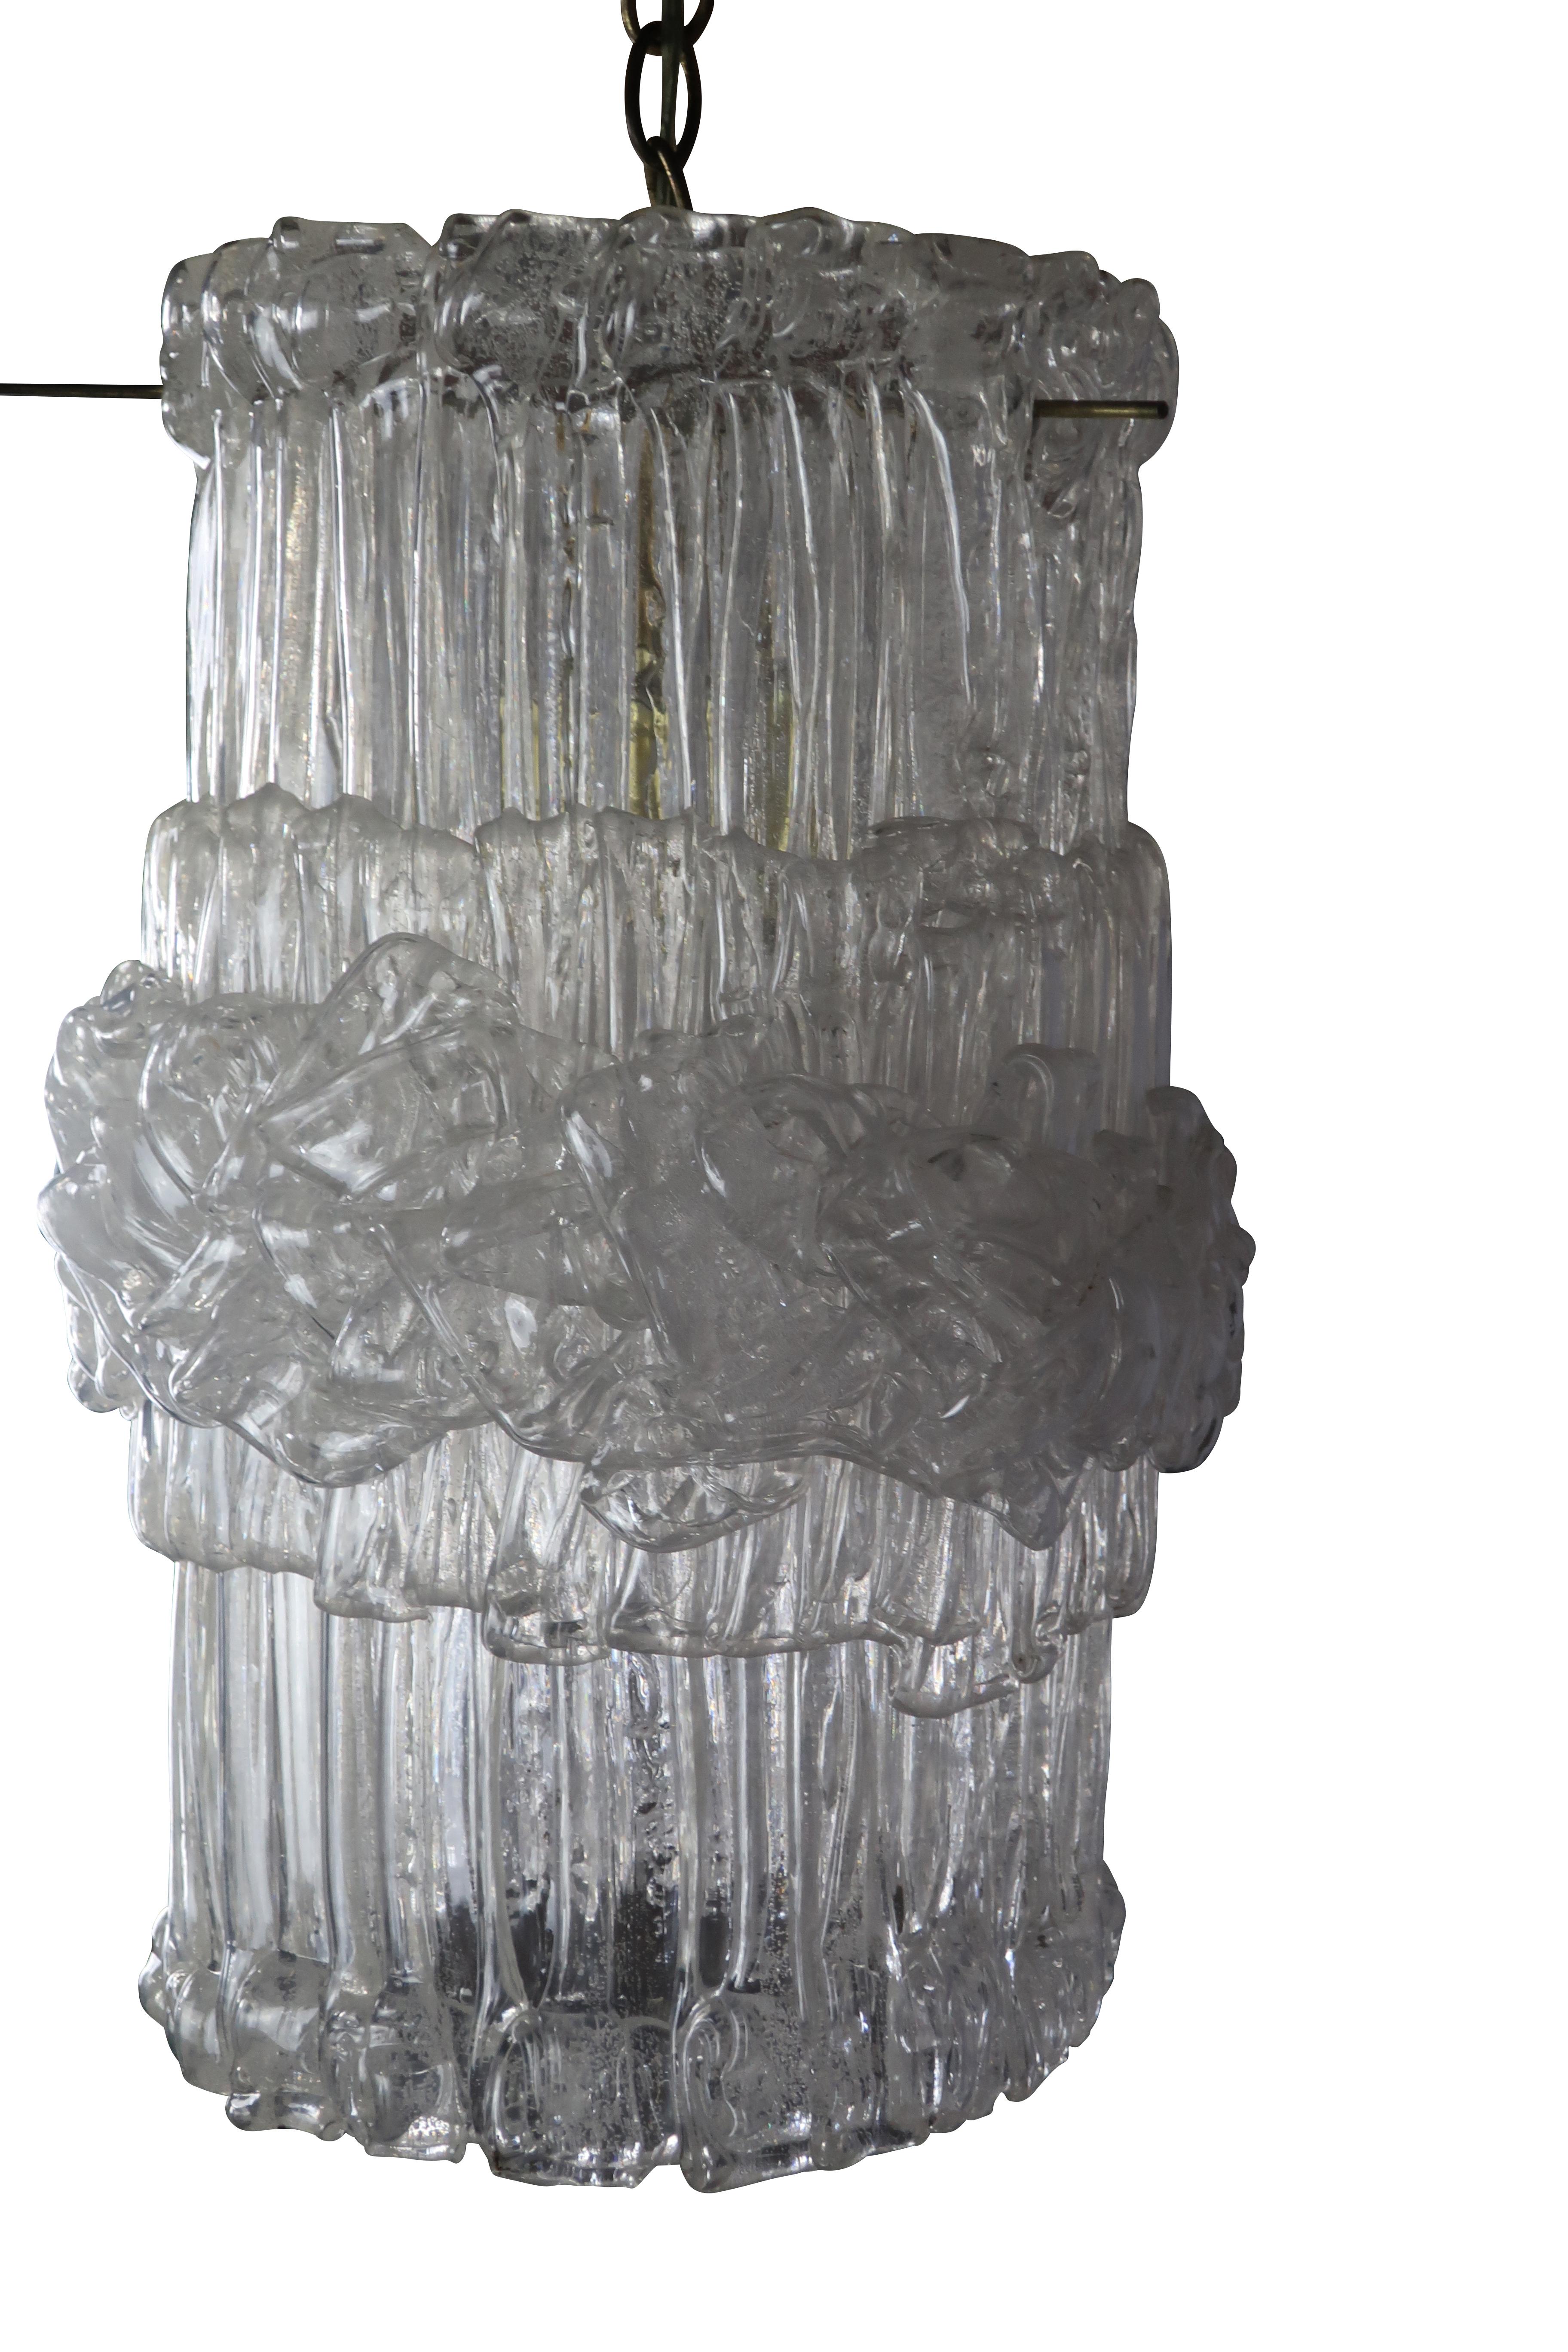 Acrylic Lucite Vintage Hanging Pendant Lights For Sale